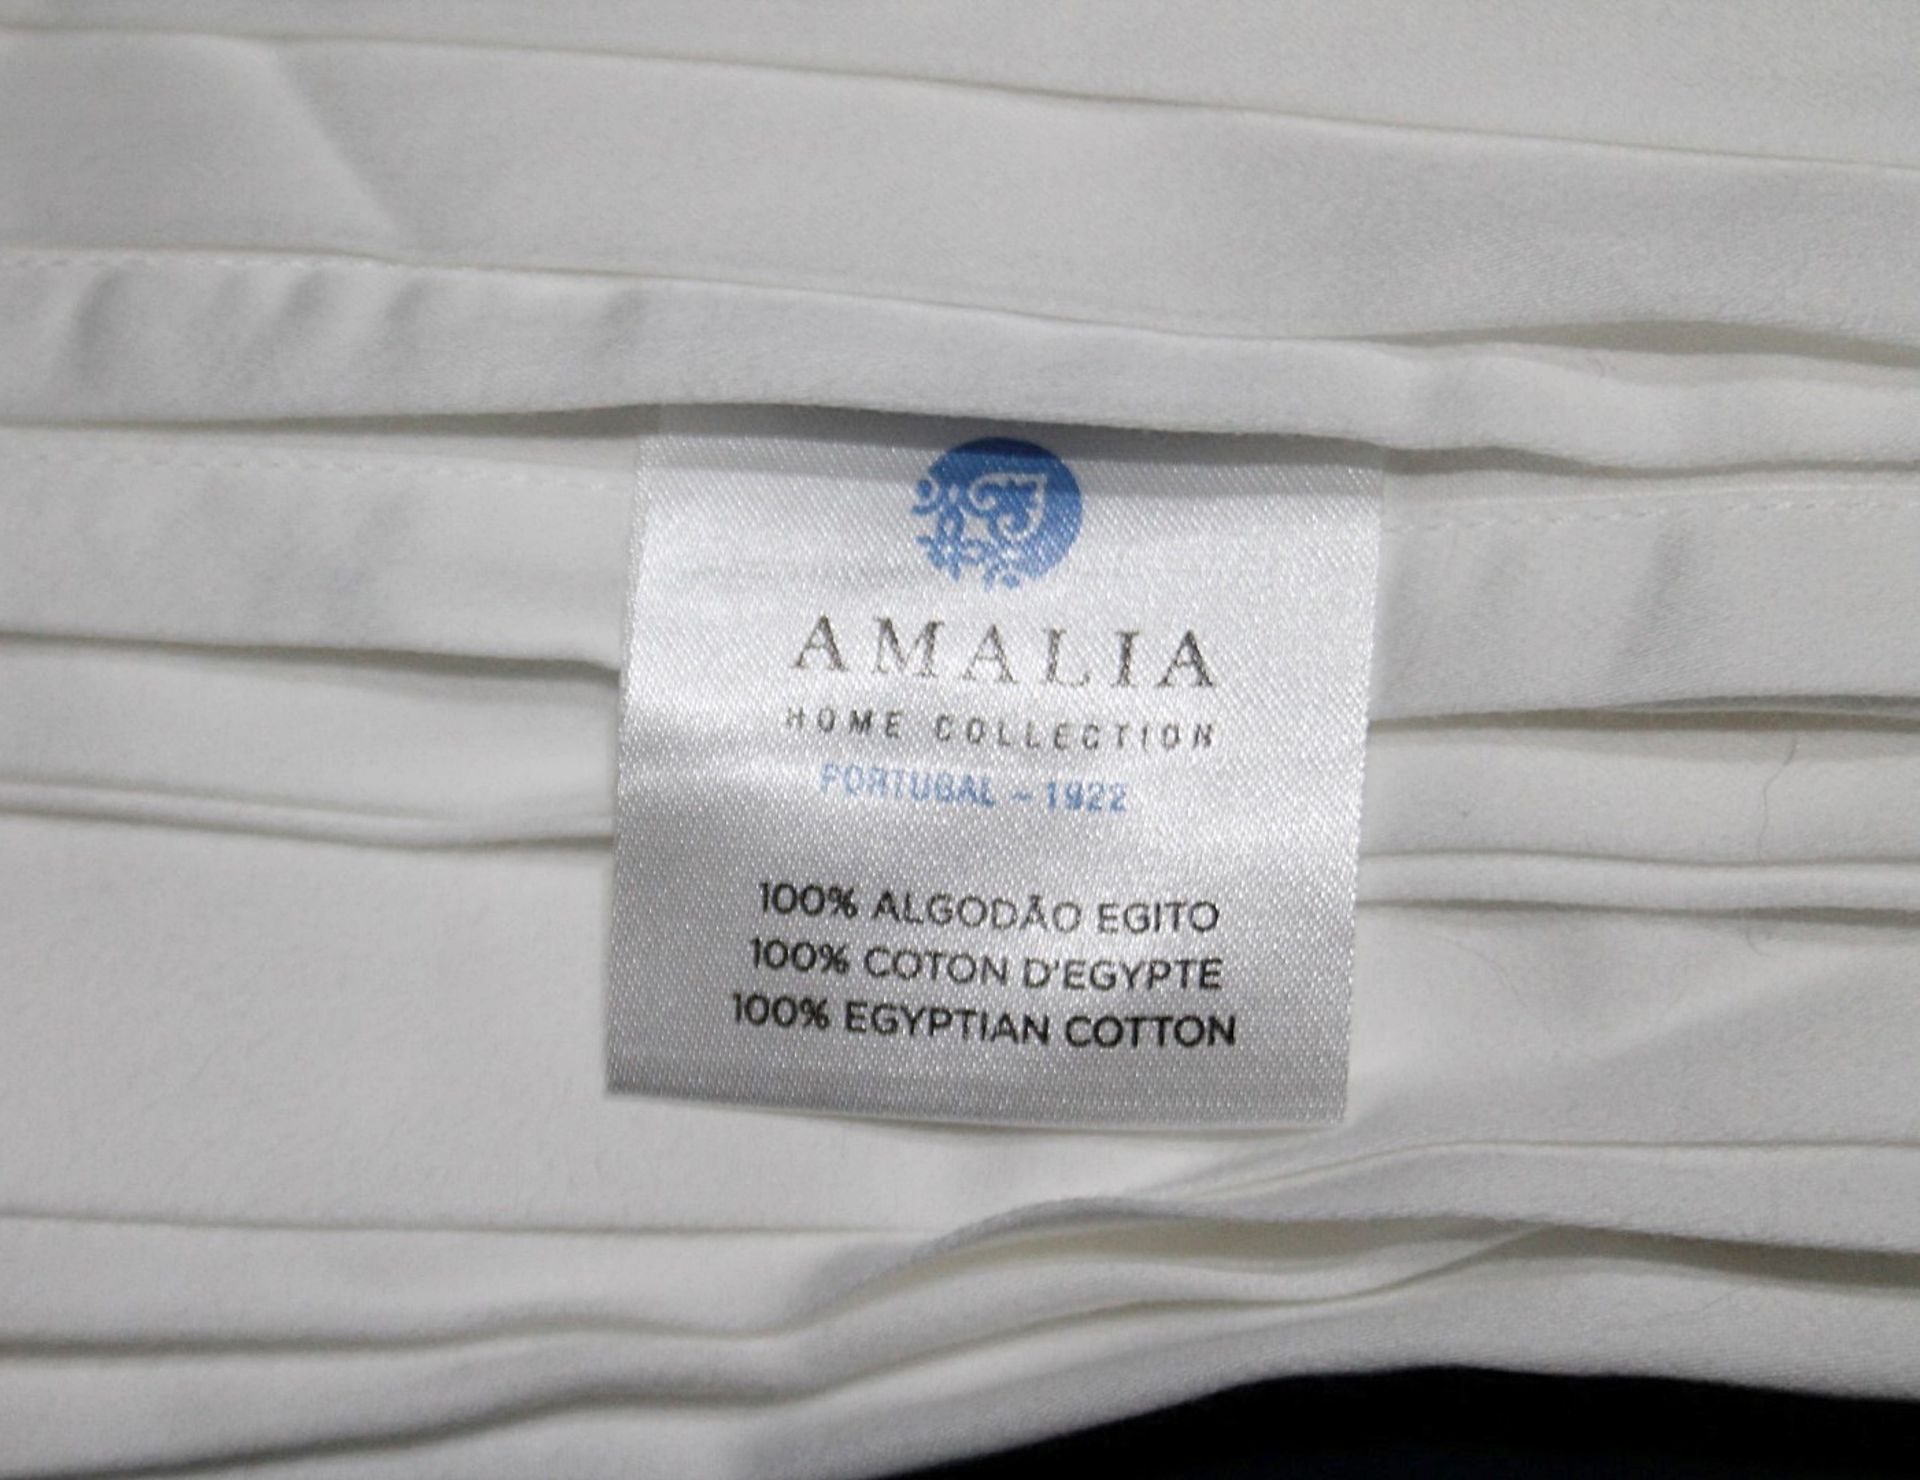 1 x AMALIA 'Chá' Luxury Super King Size Duvet Cover With Pillowcases Cases And Sheet- Dimensions: - Image 4 of 9